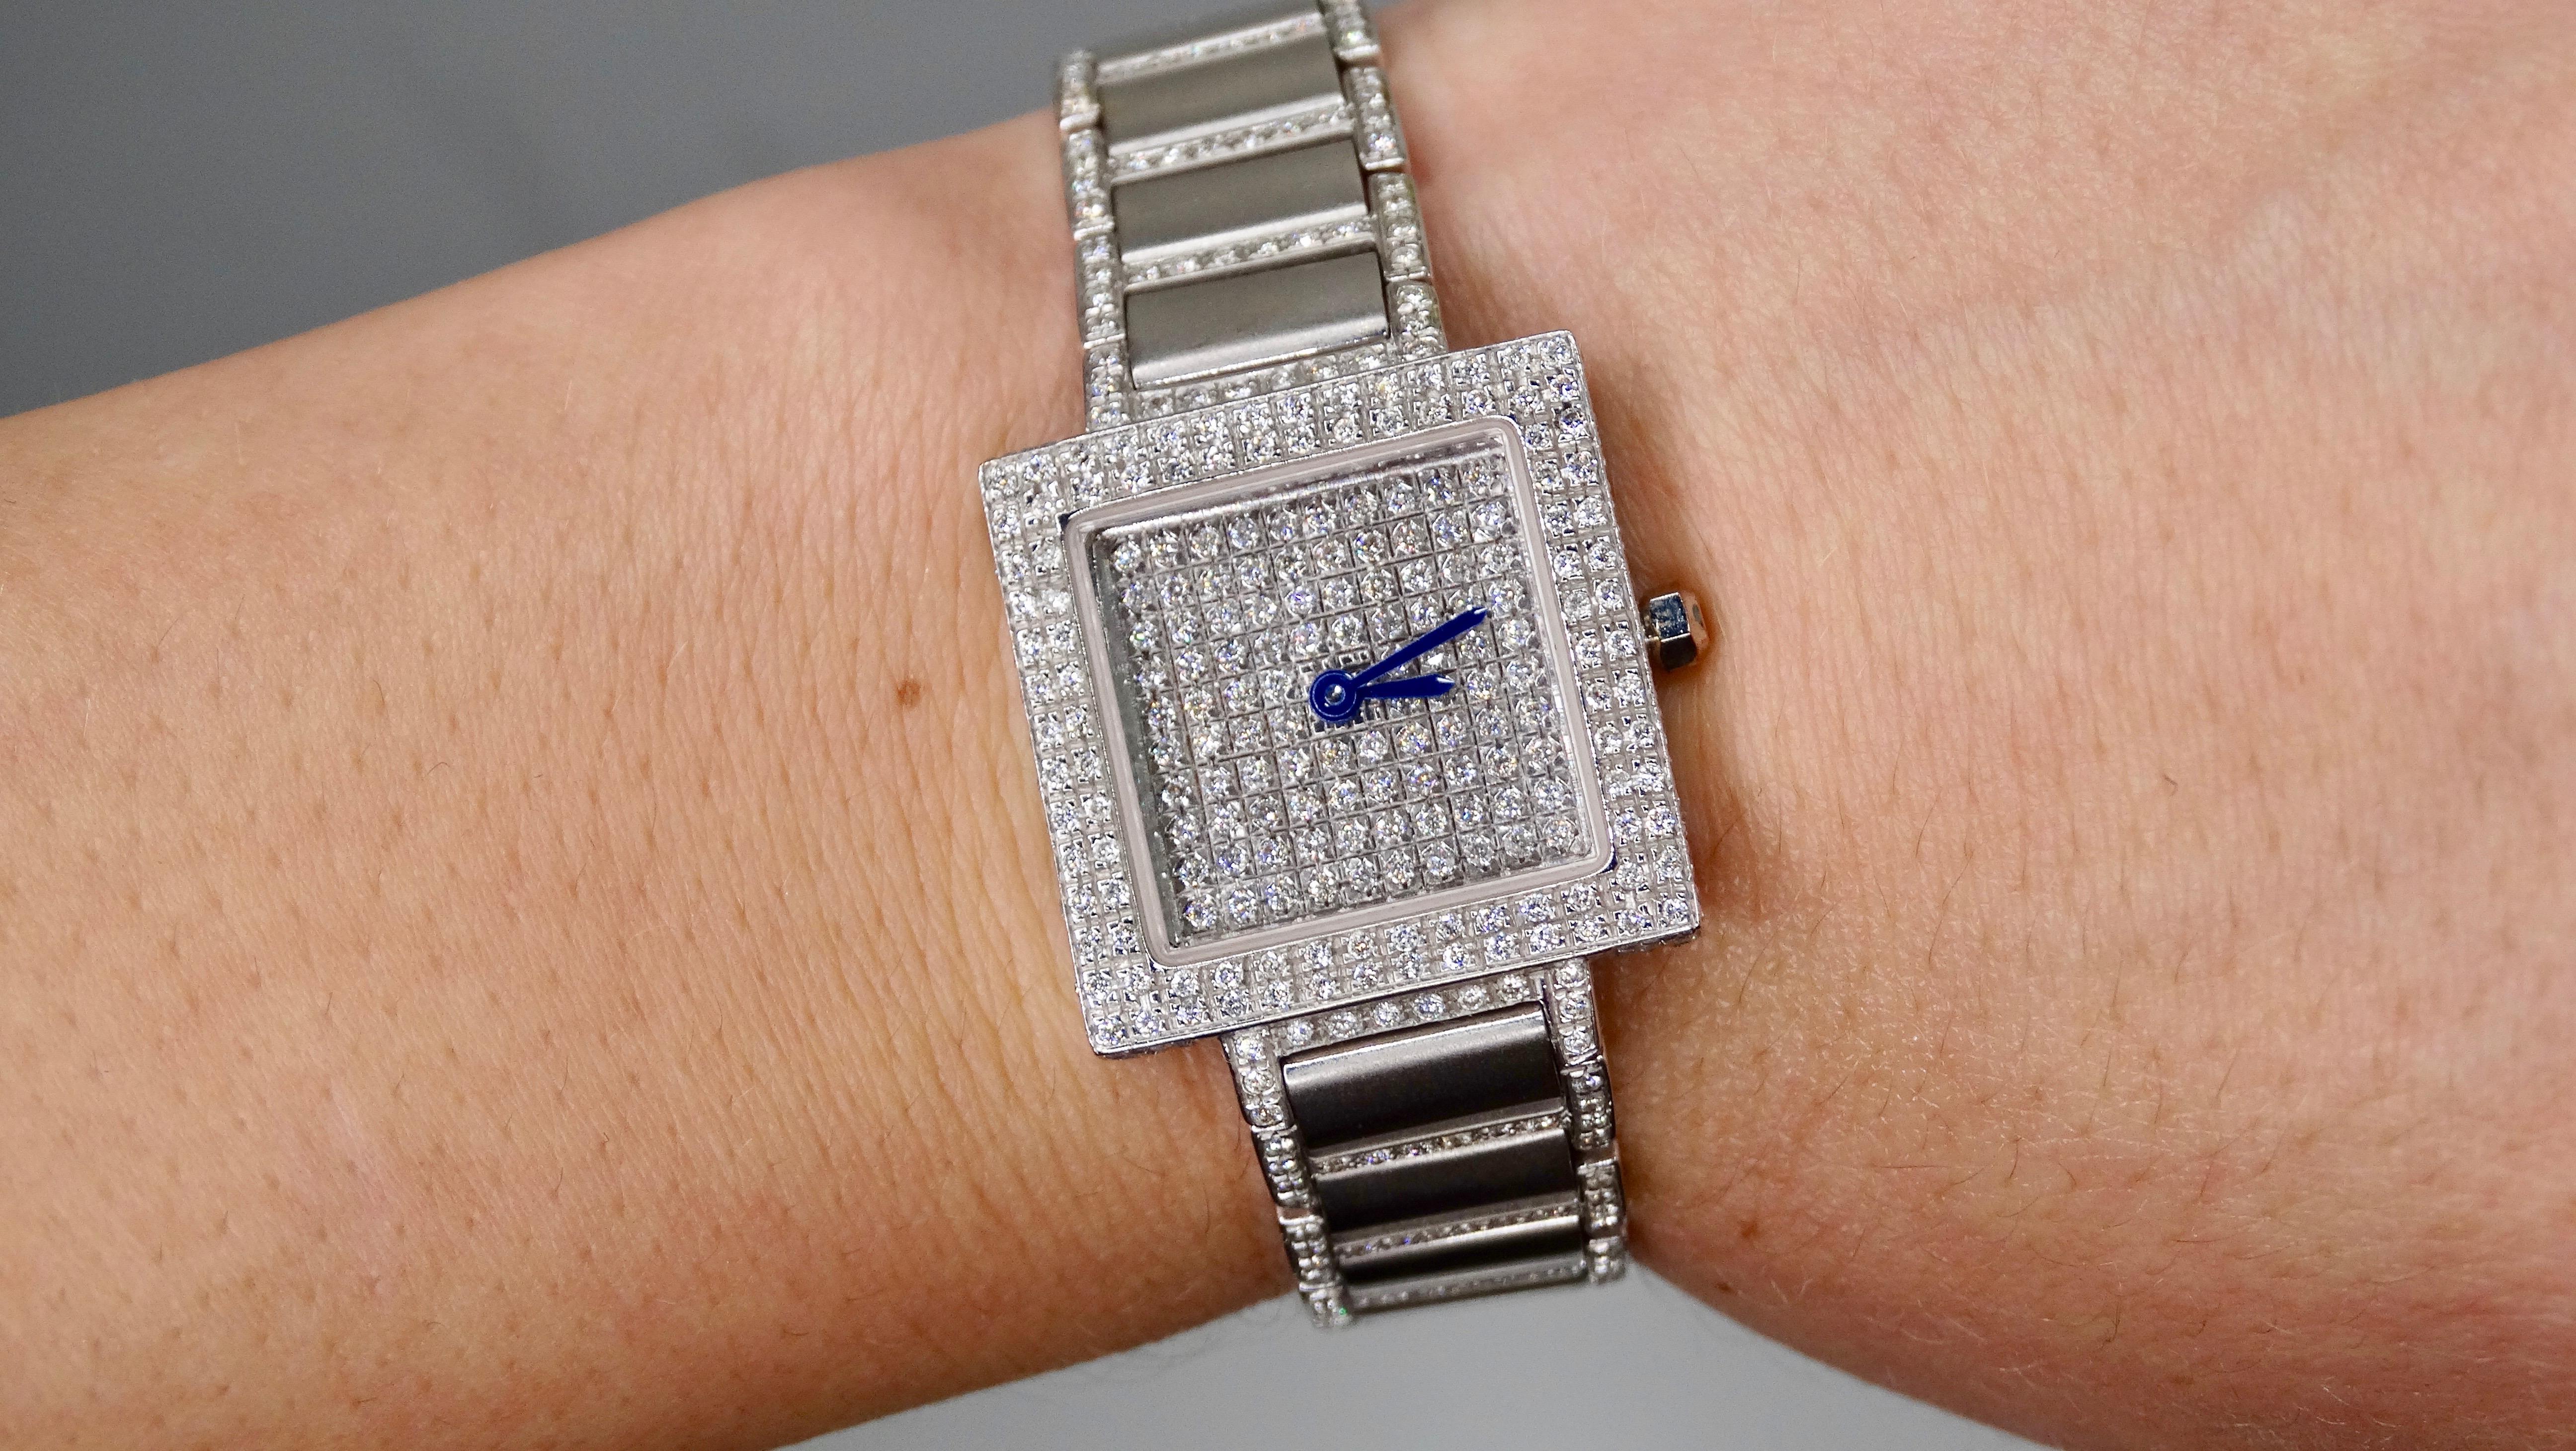 Take sparkle to a new level with this stunning diamond watch! Circa late-20th century, this custom made watch is crafted from 18k White Gold with a link bracelet. Encrusted with over 150 brilliant round cut VS Diamonds, this watch features a square